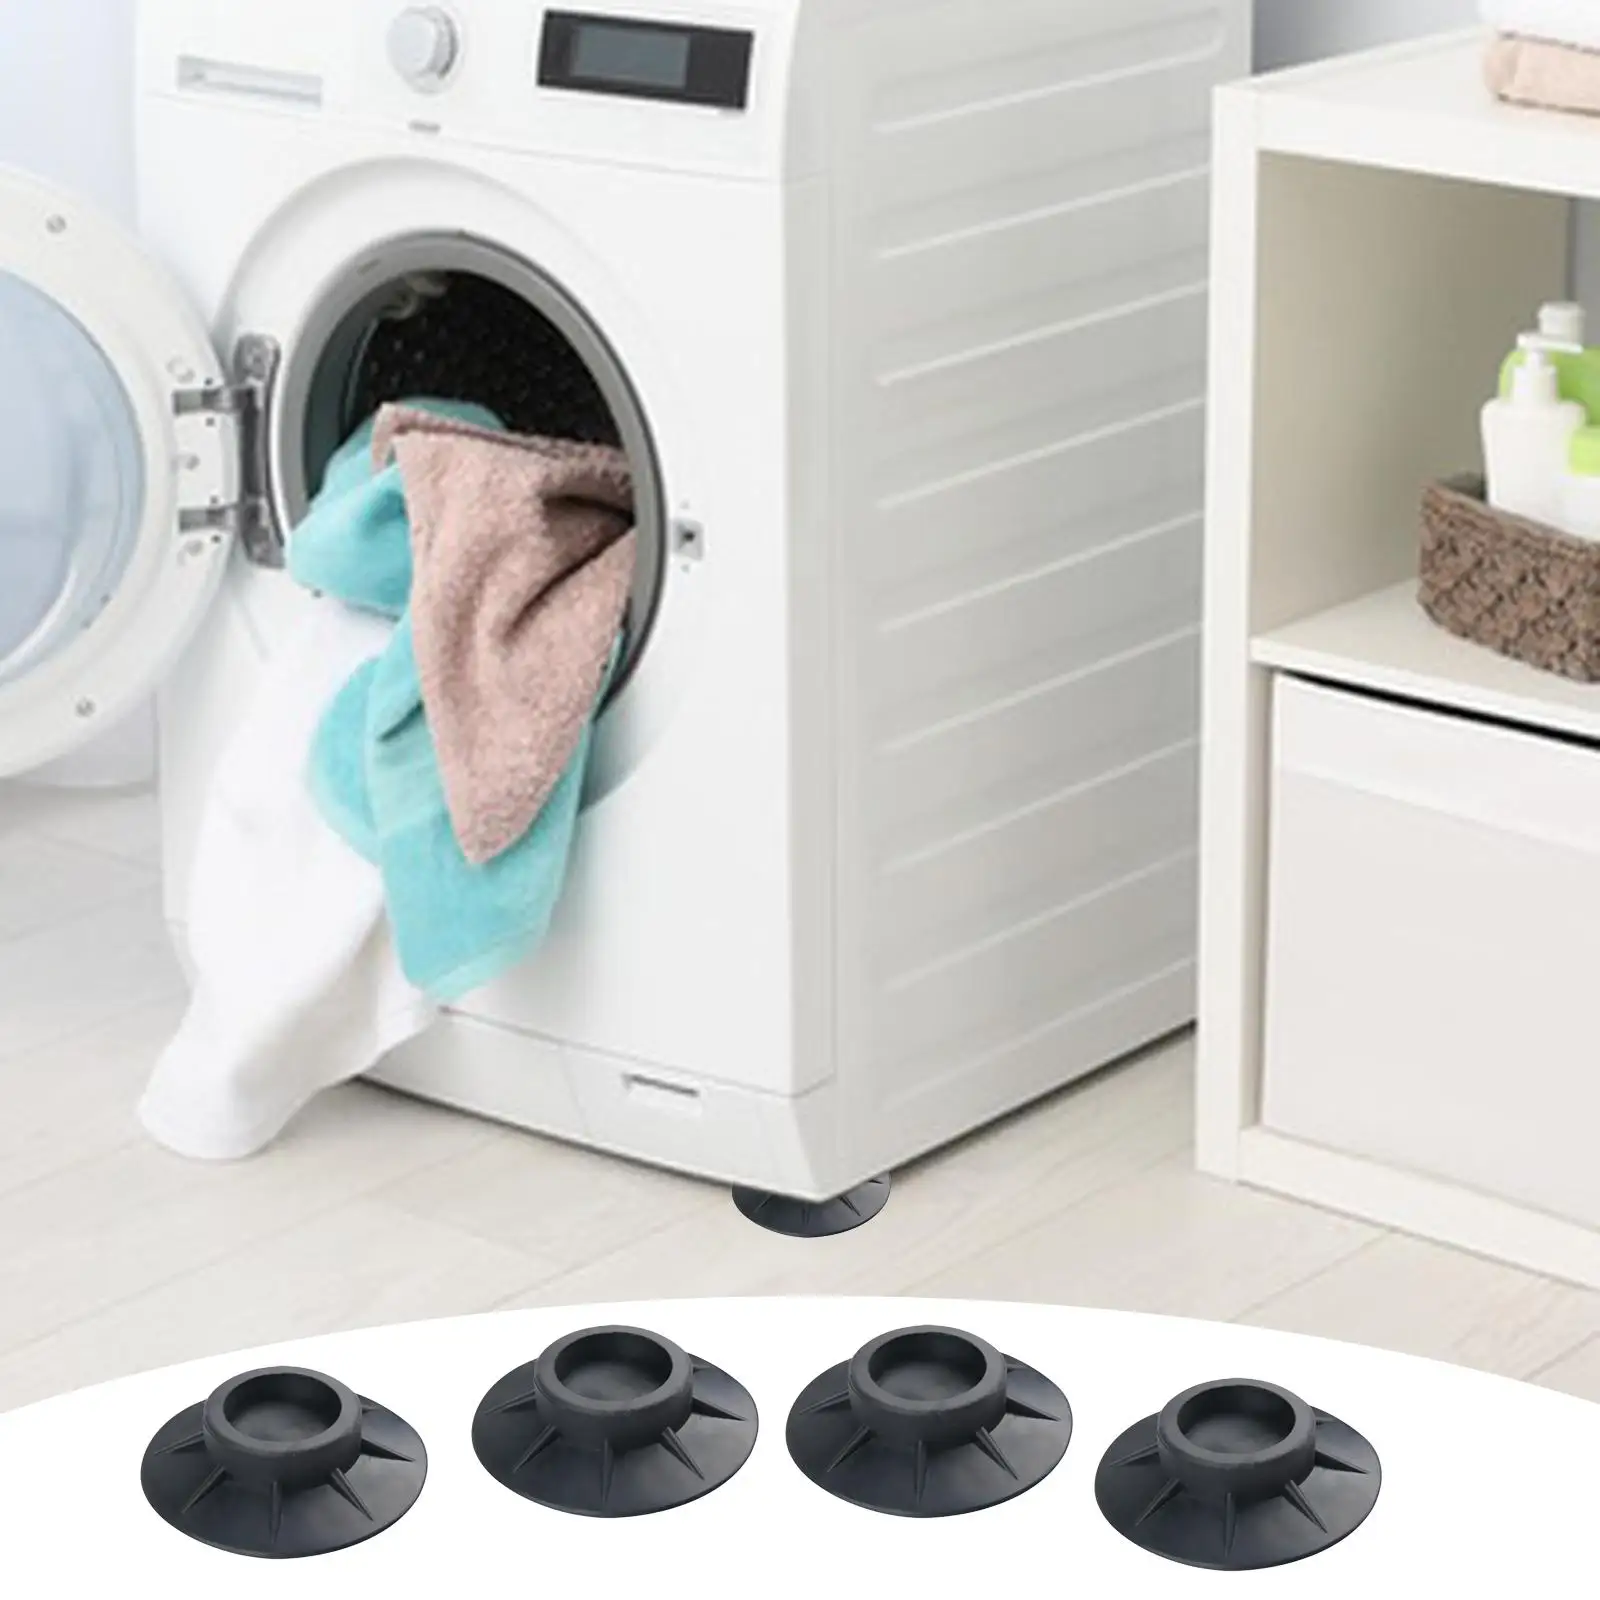 4 Pieces Dryer Pedestals Covers Slip Protects Laundry Room Floor Universal Rubber Slipstops Washing Machine Feet for Fridge